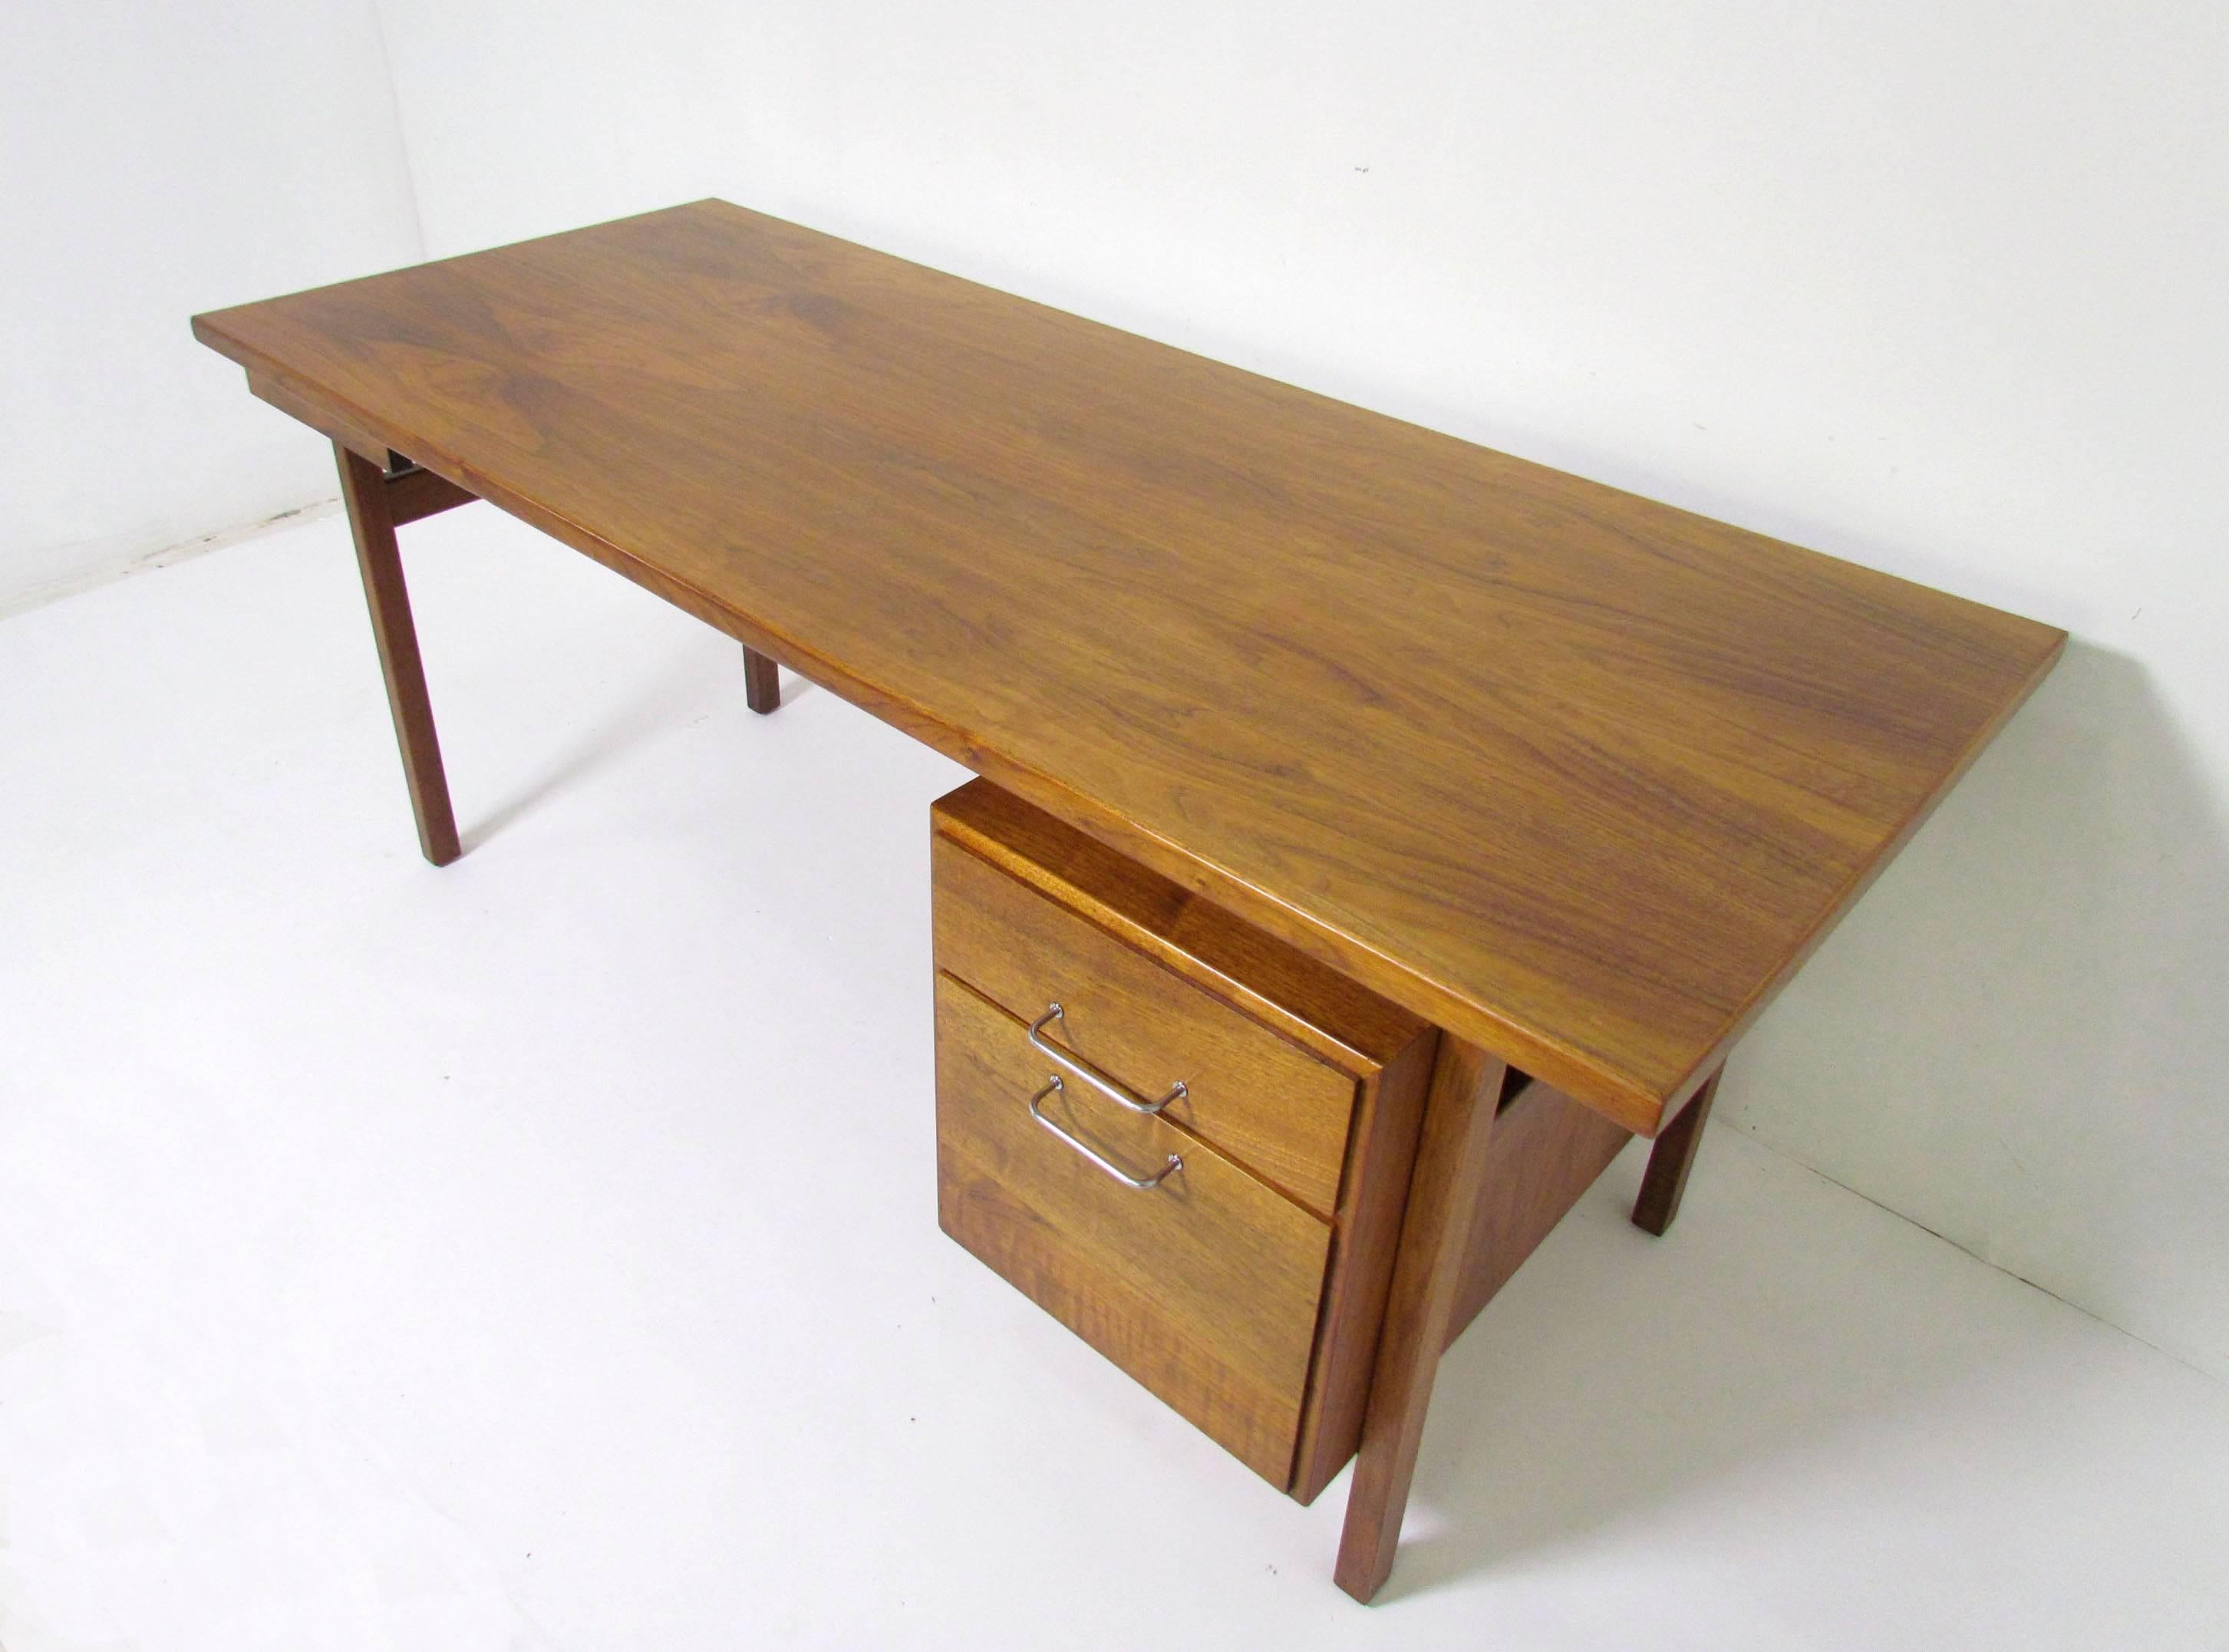 Mid-Century Modern work station desk in walnut by Jens Risom, circa 1960s, with optional (removable) return that mounts to left of seat. Bank of drawers on right include pencil organizer and a deep drawer for hanging files.

Desk measures 72"